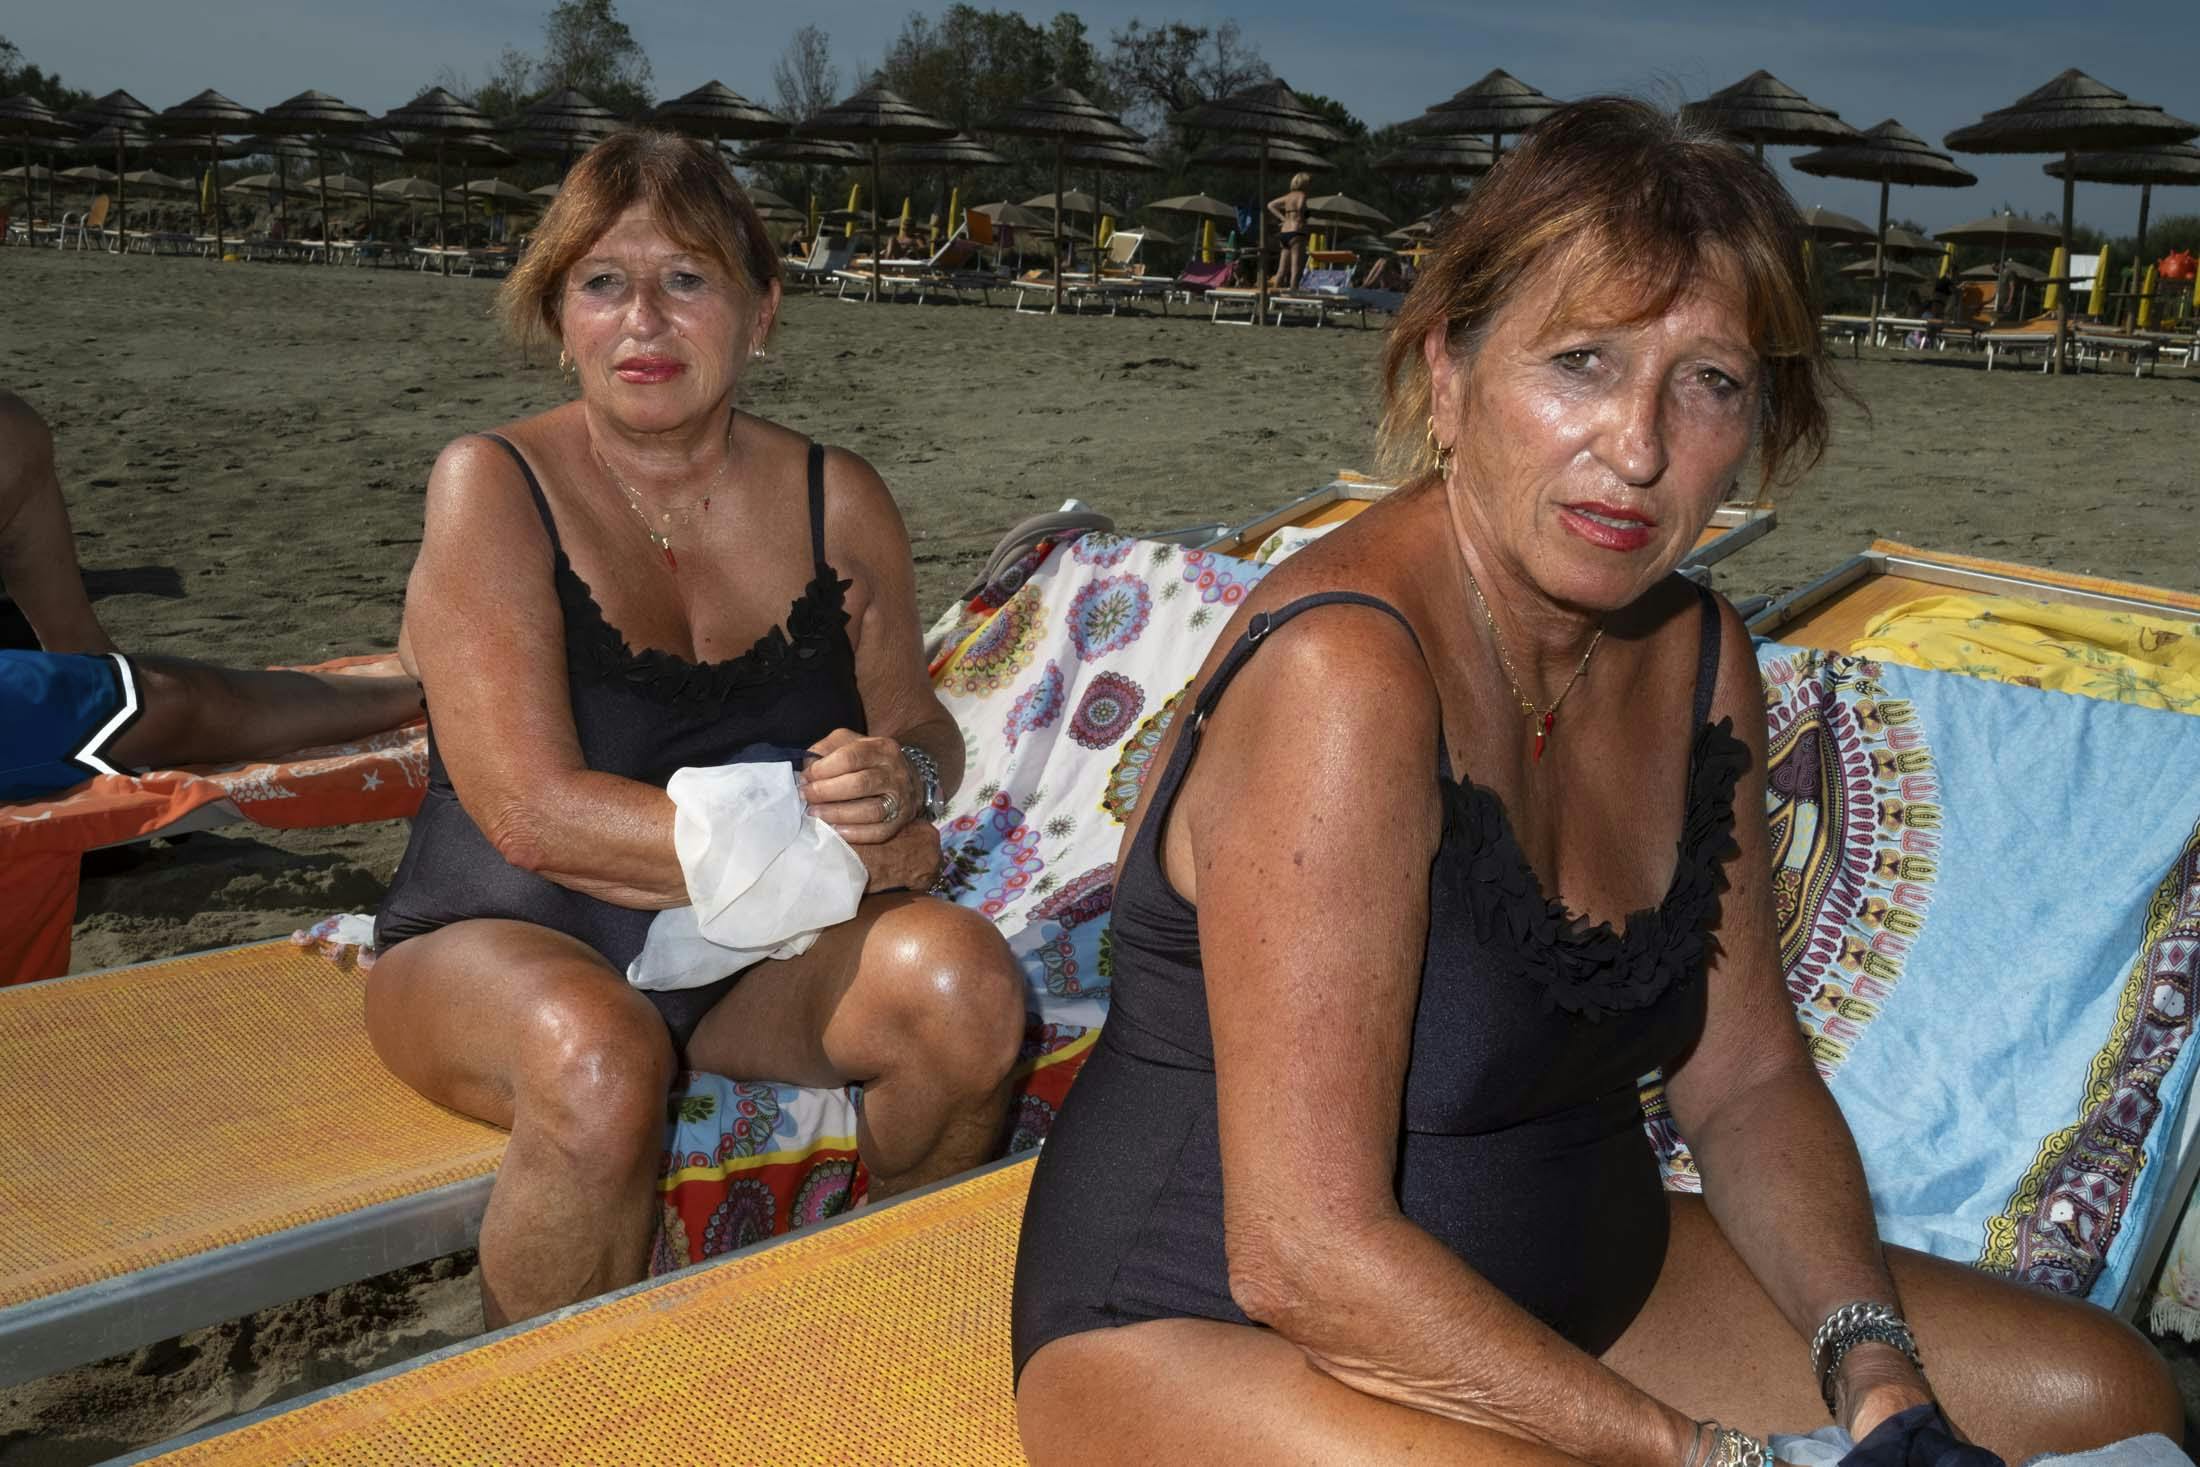 identical twins on beach in italy